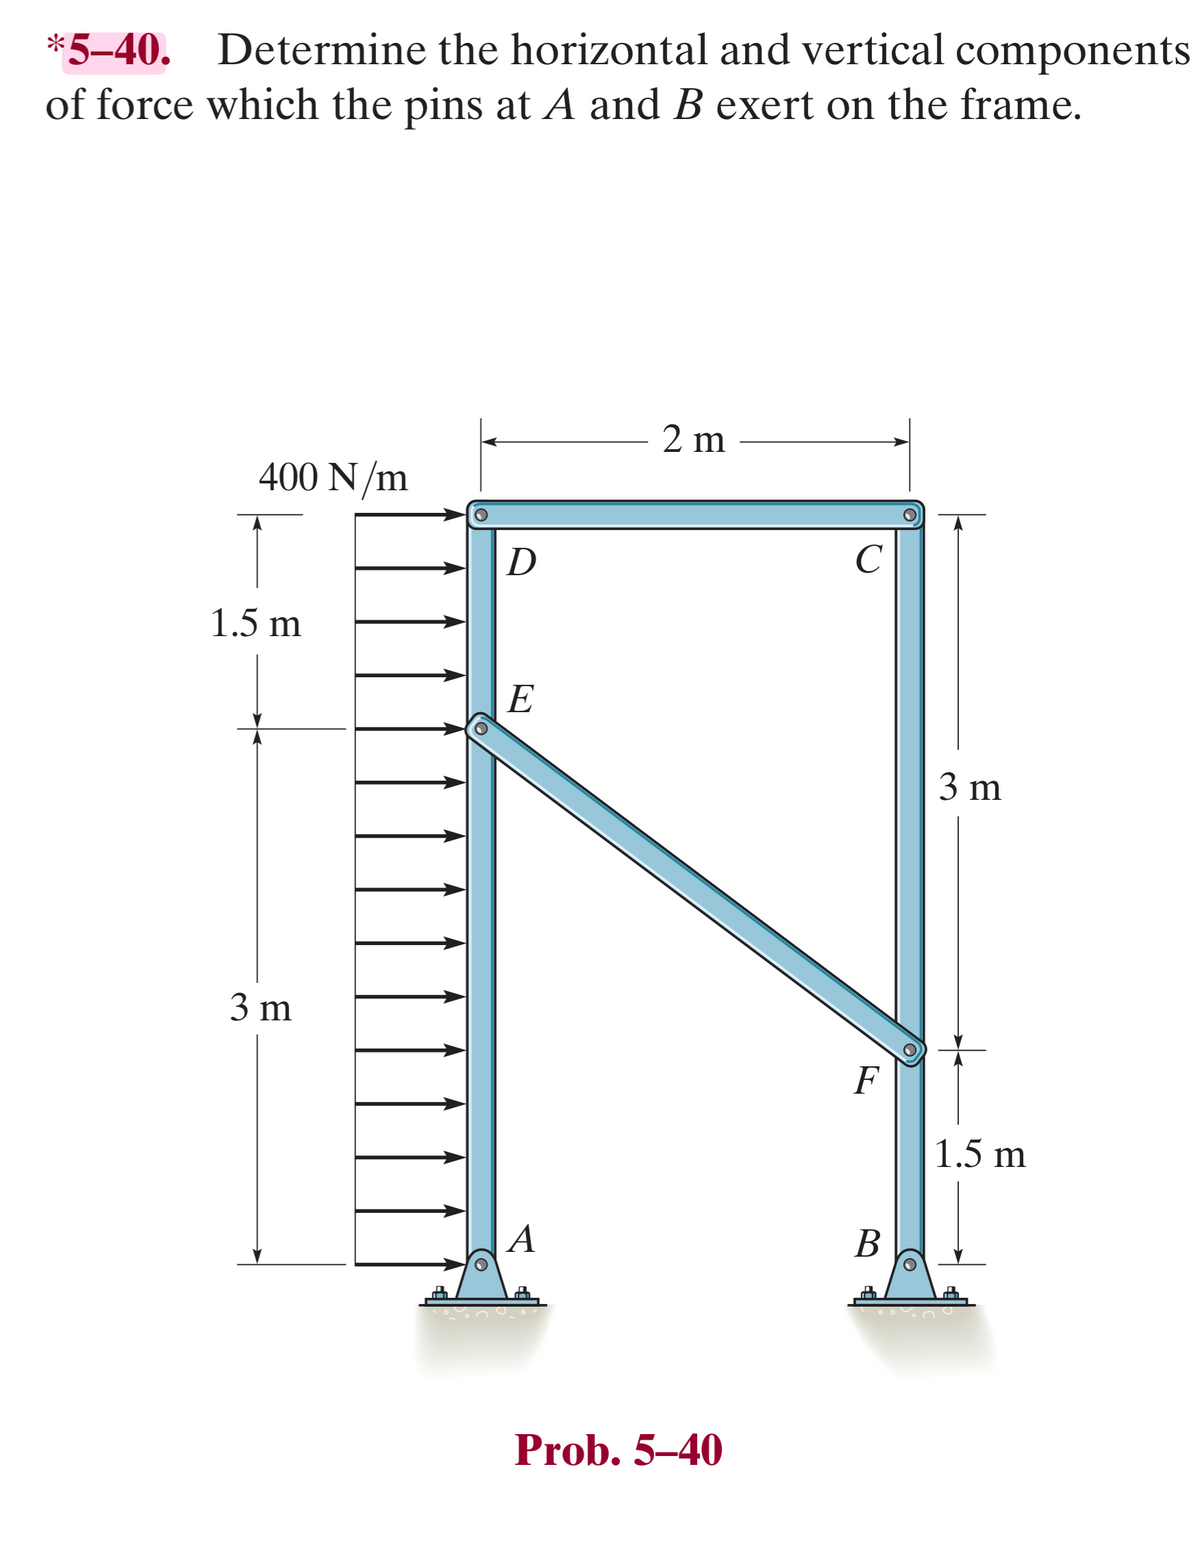 *5-40. Determine the horizontal and vertical components
of force which the pins at A and B exert on the frame.
400 N/m
1.5 m
3 m
D
E
A
2 m
Prob. 5-40
с
F
B
3 m
1.5 m